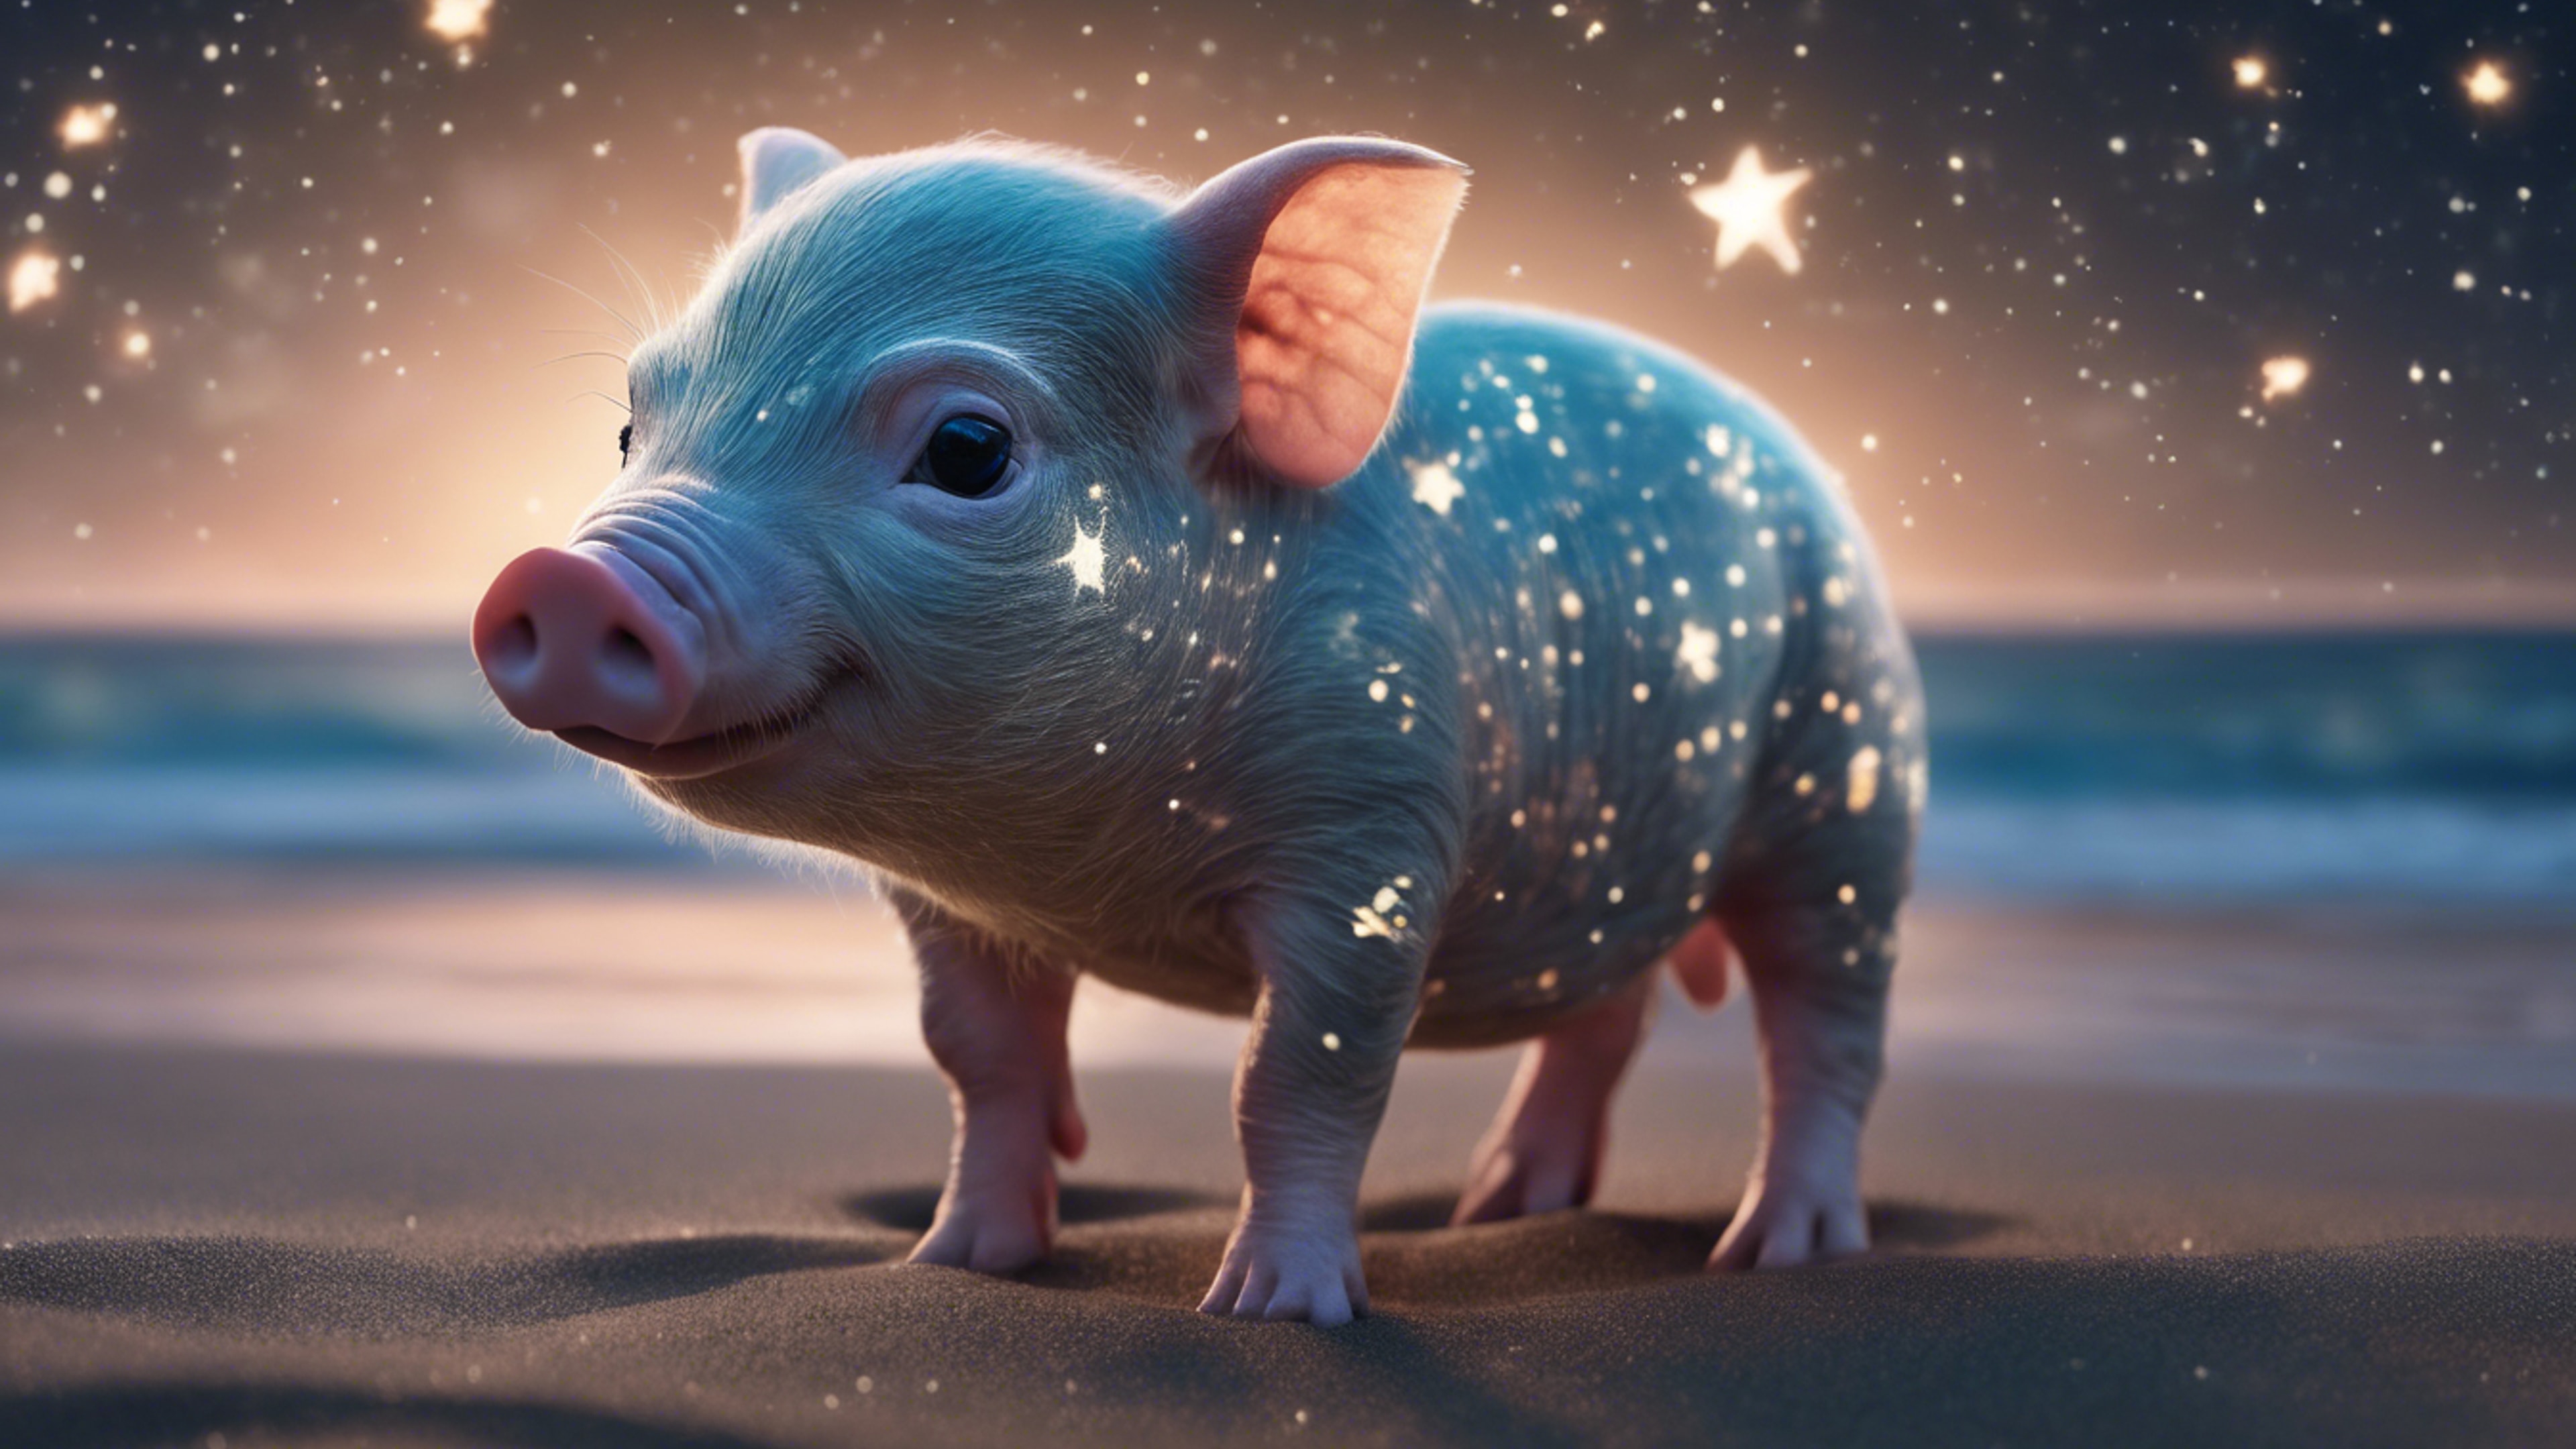 An unique digital rendering of a bioluminescent piglet on a calm beach under starry night sky. Wallpaper[597018af159c4f7fa895]